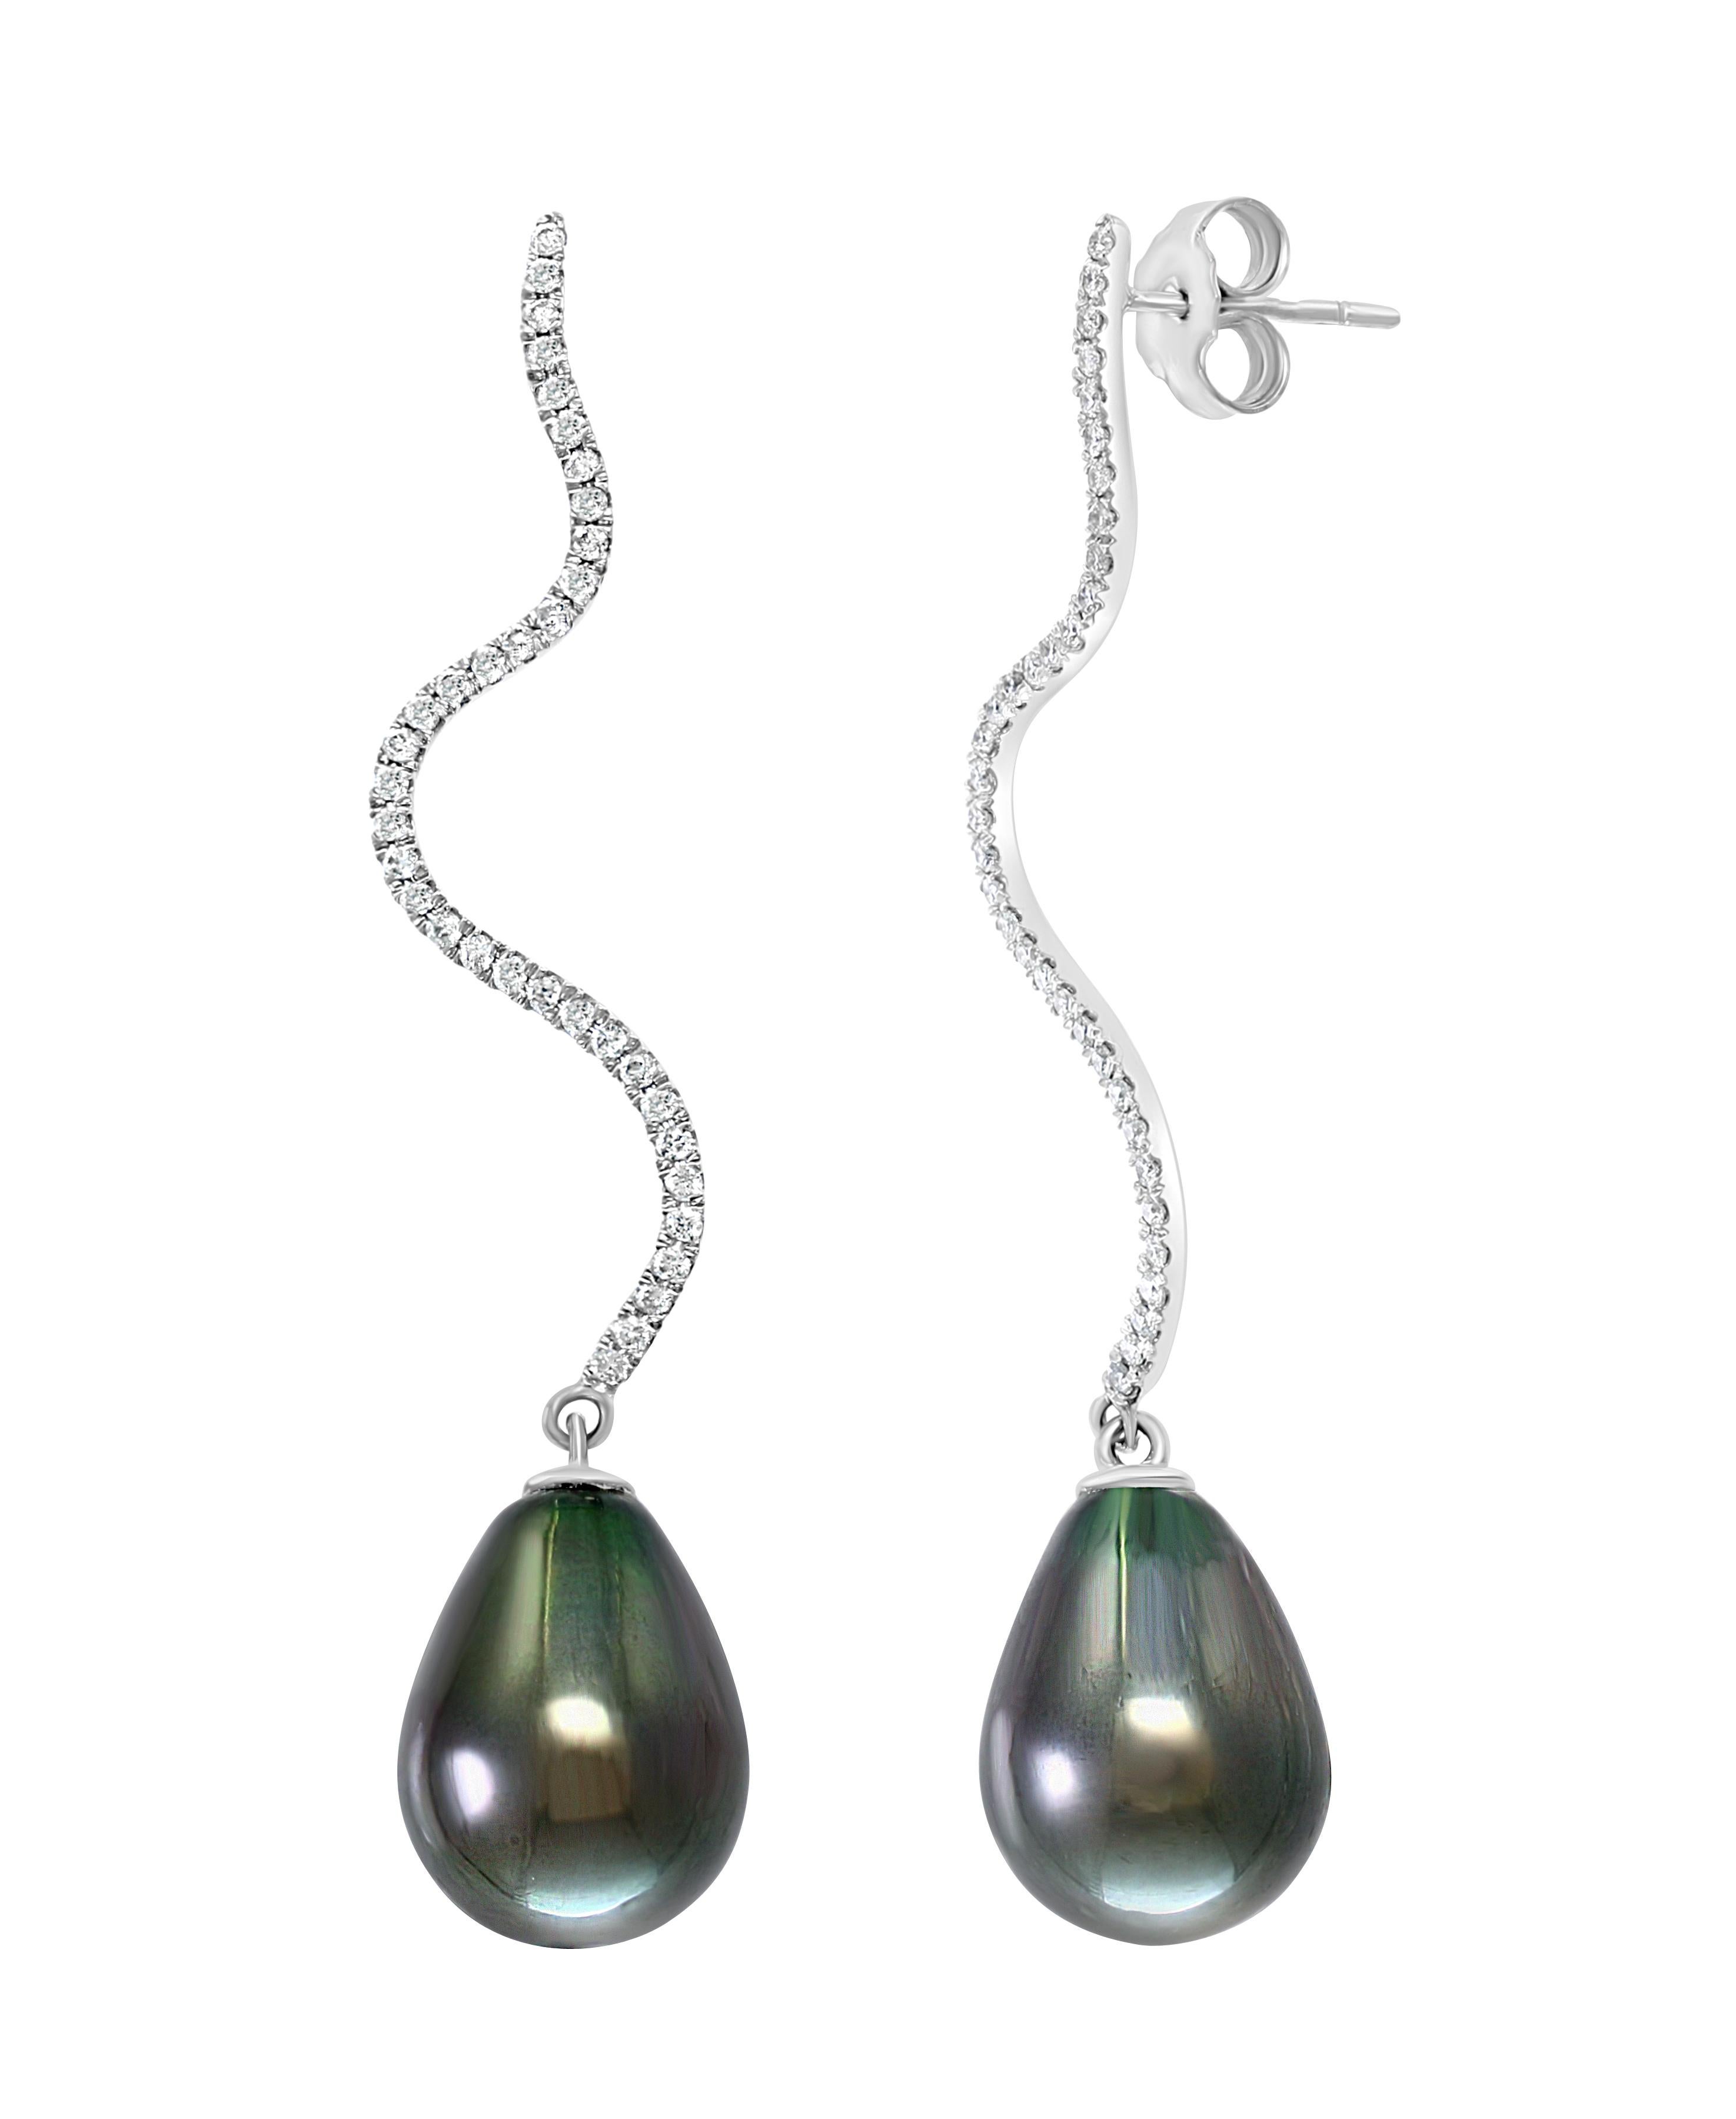 These elegant Diamond and Pearl earrings contain South Sea Tahitian cultured drop pearls dangling gracefully from white gold and diamonds. A perfect complement to any evening apparel.
- 14K White Gold.
- 0.53 Carats of Diamonds. 
- Pearls measure